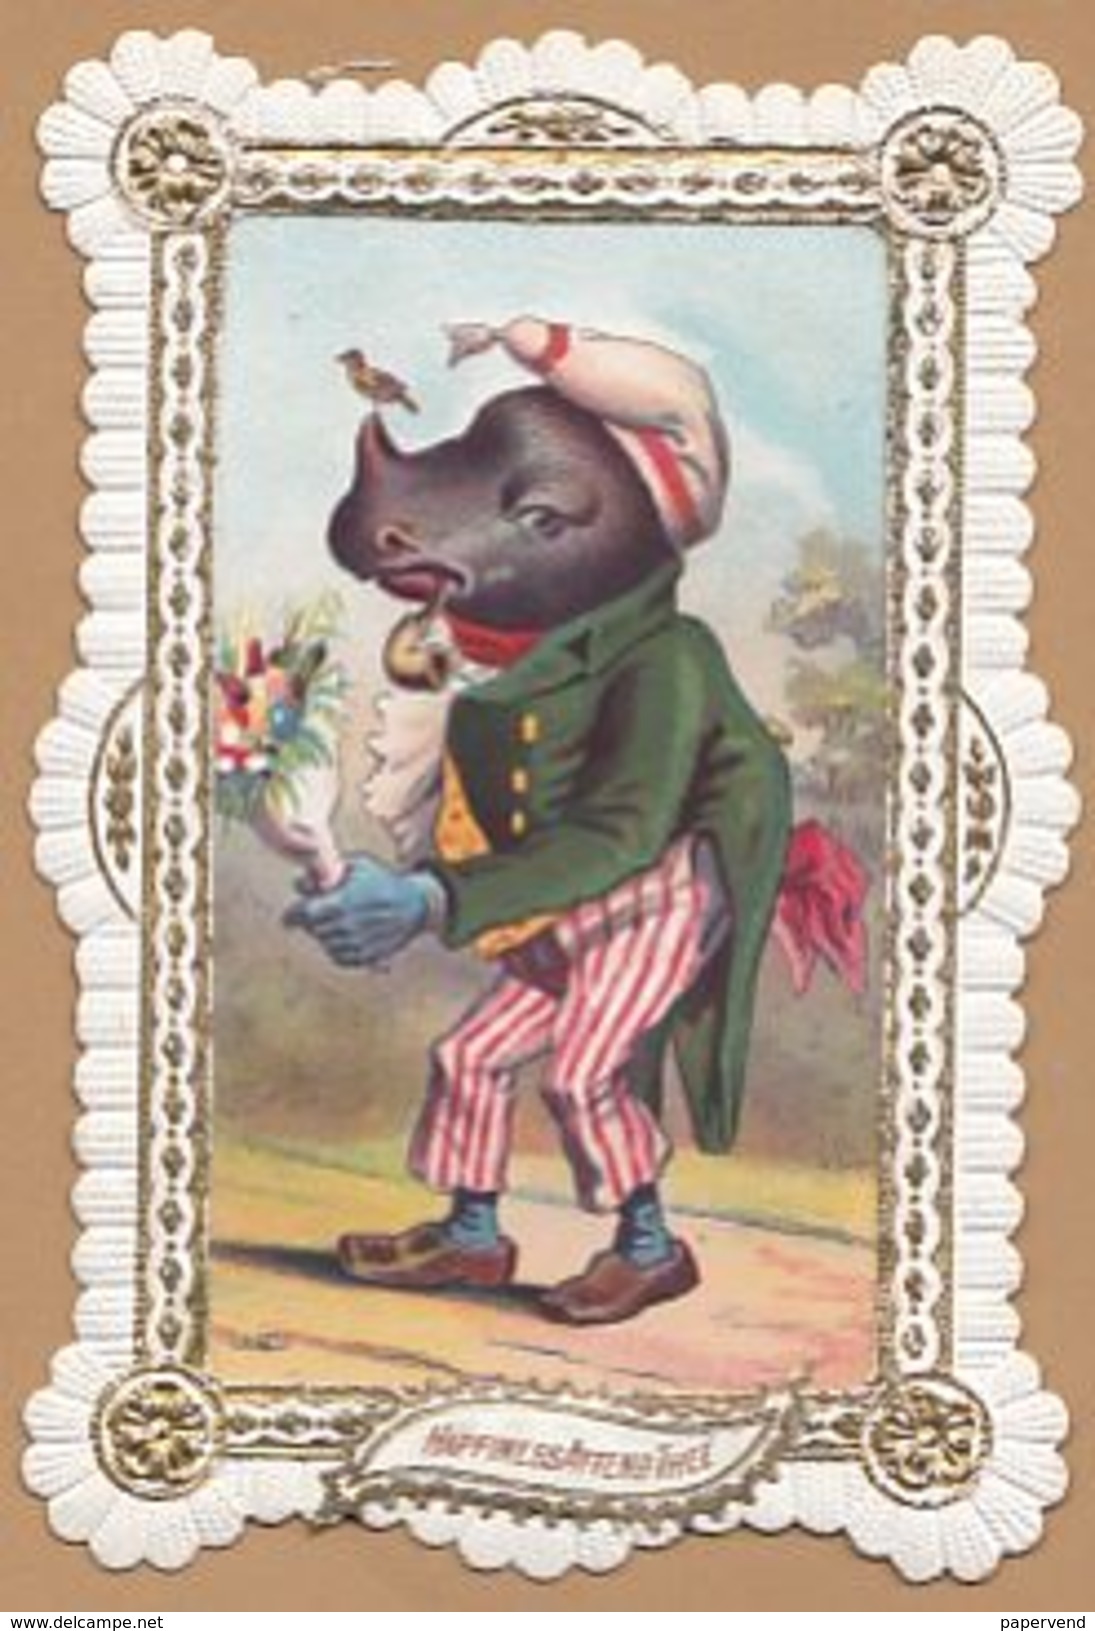 Victorian Greeting Card Rhinoceros With Flowers Egc54 - Unclassified